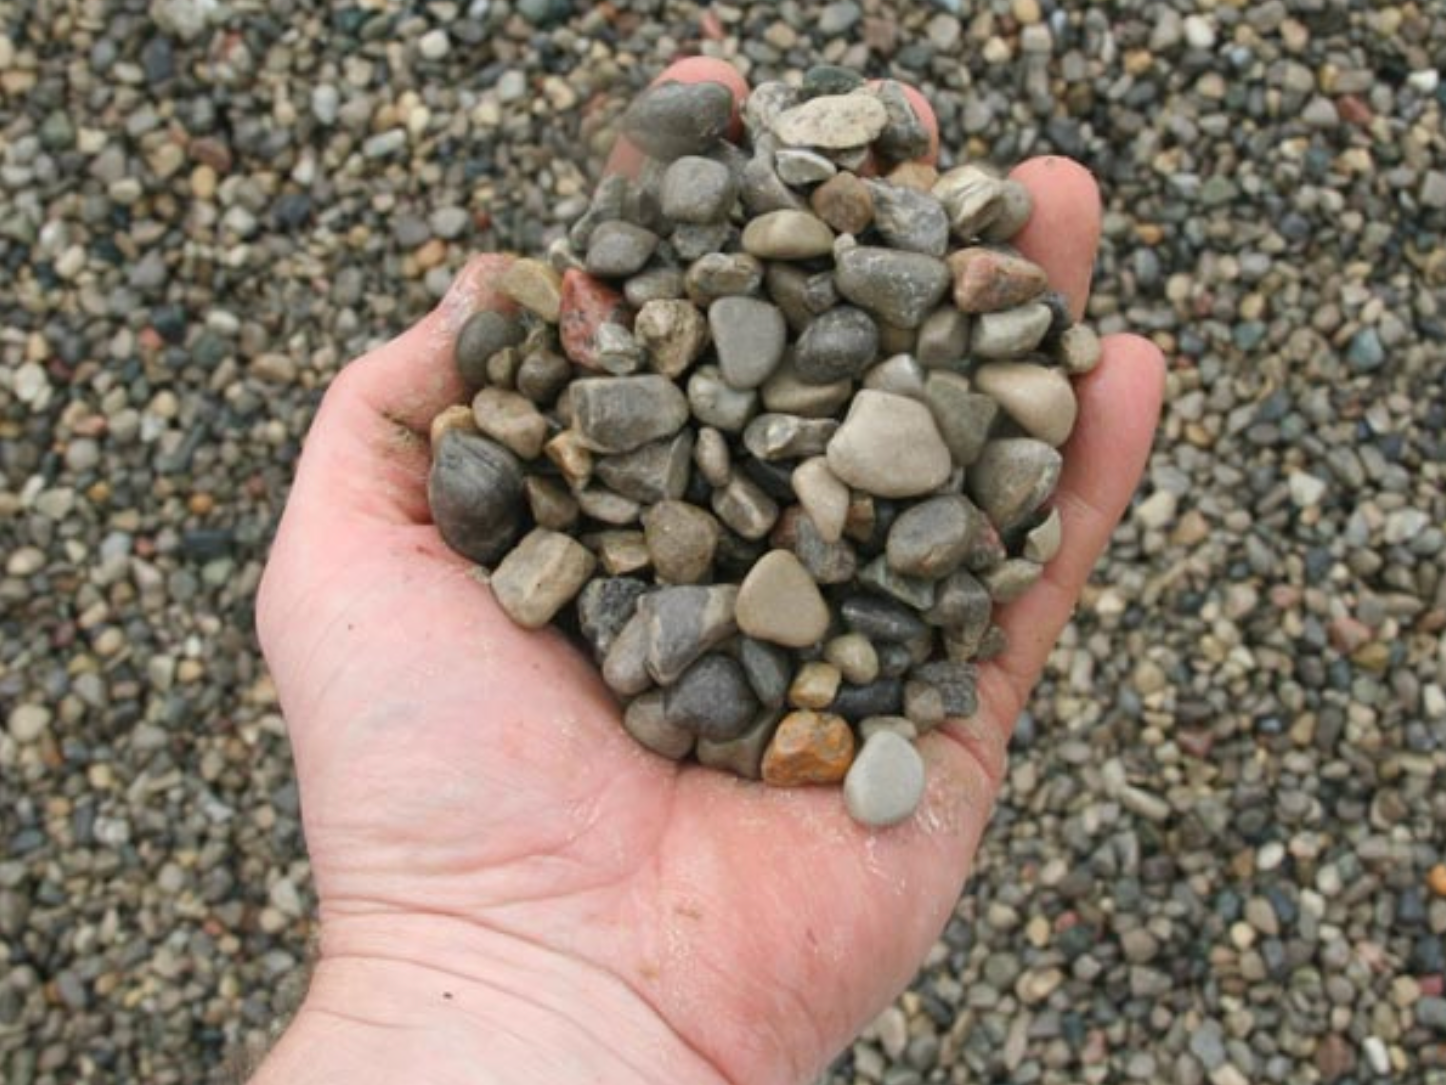 a person is holding a pile of rocks in their hand .